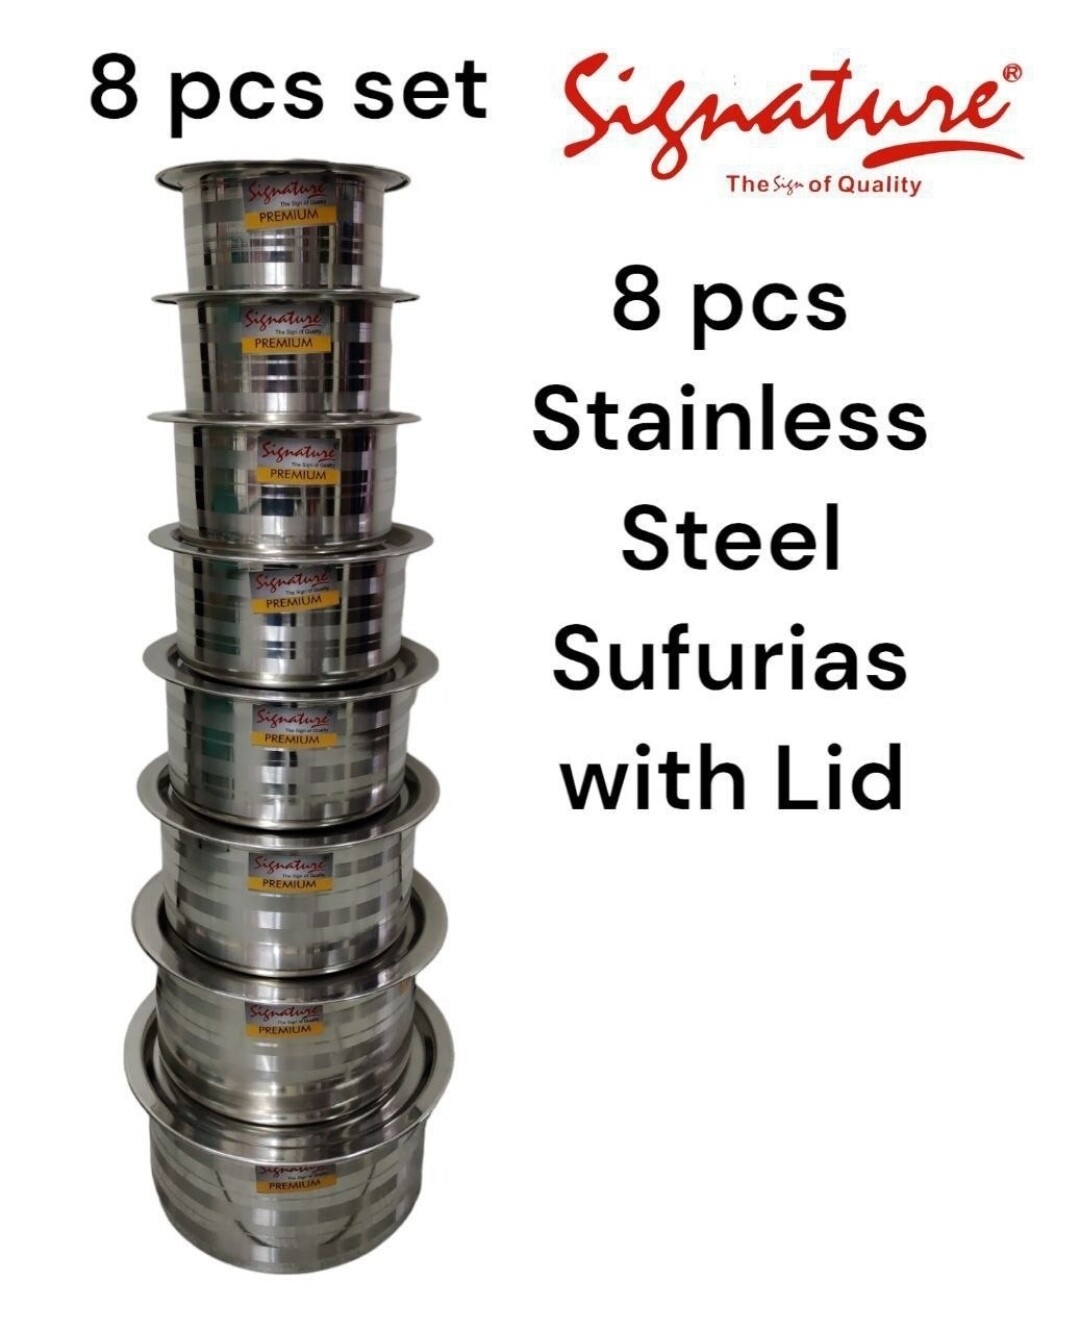 Signature 8pcs Sufurias with lids. Stainless Steel Cooking Pots